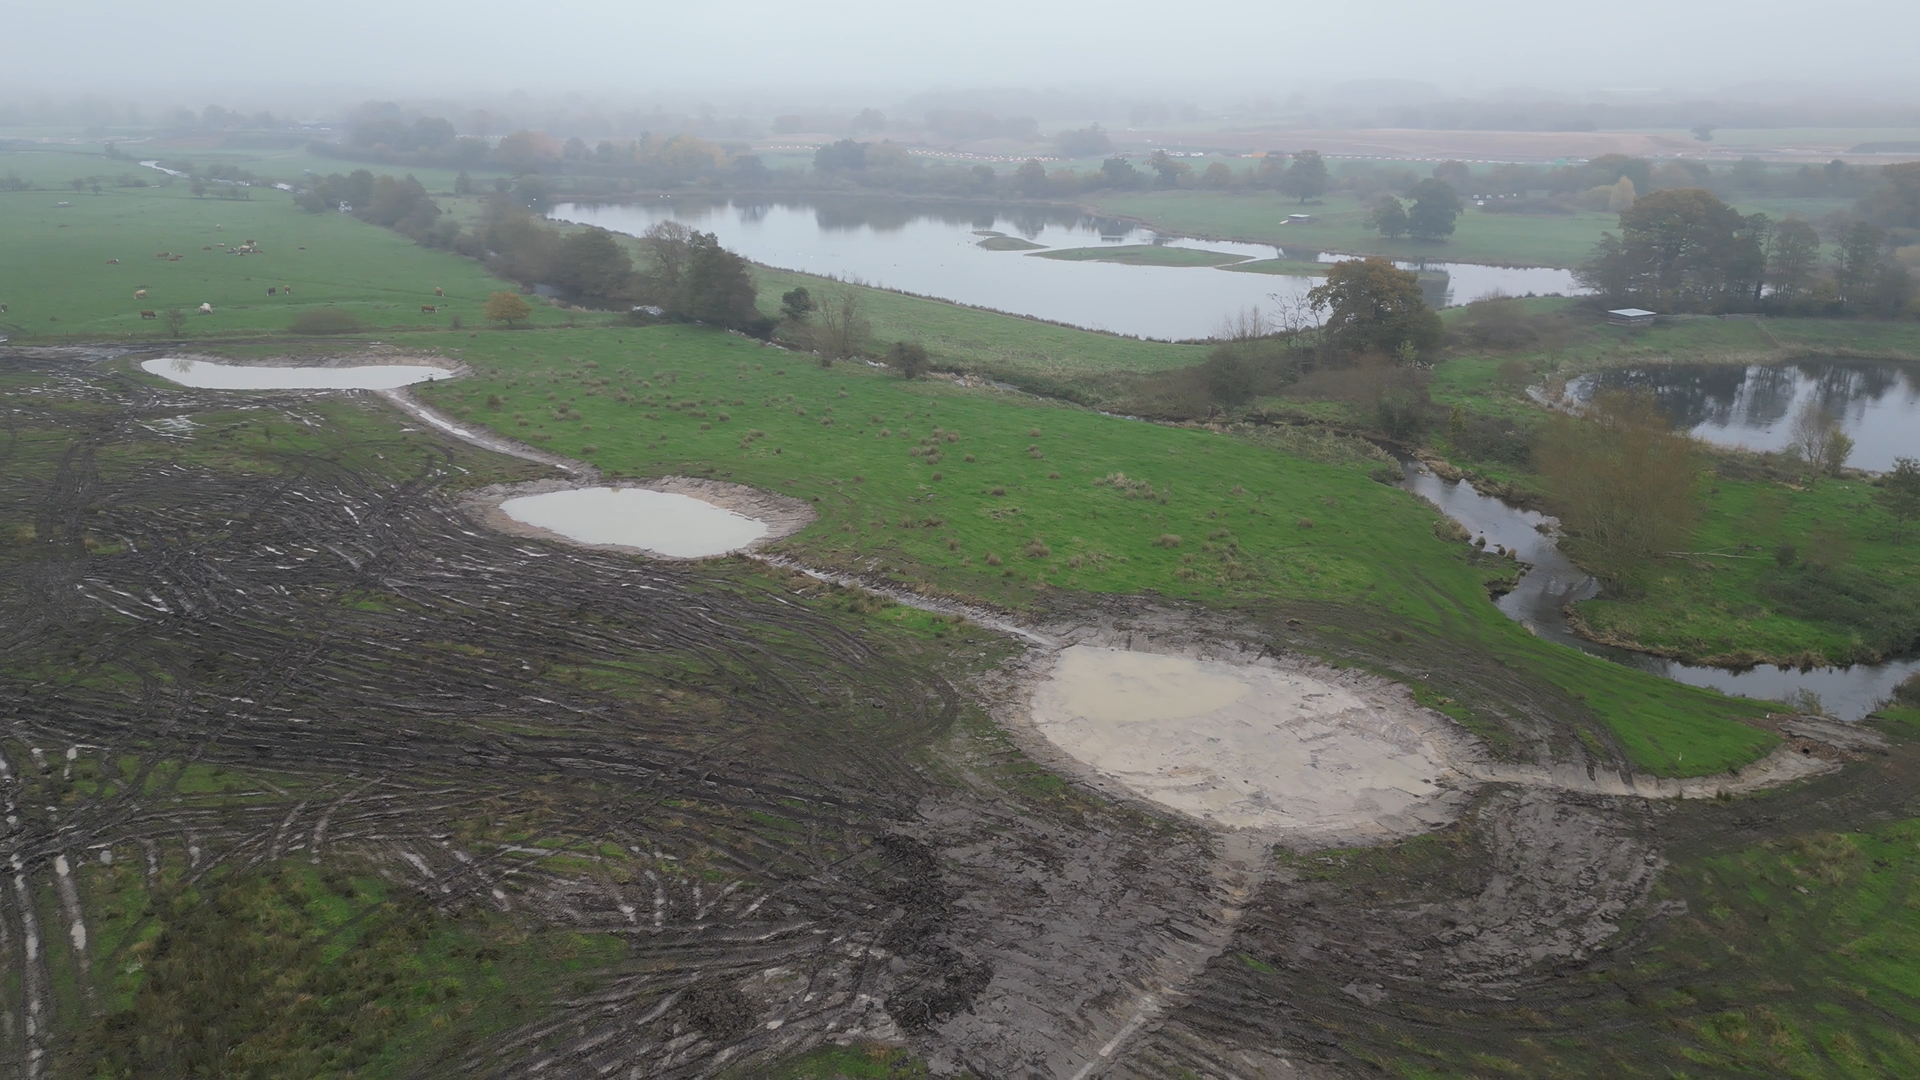 bird's eye view of the completed scrapes - a number of large shallow pools of water connected by thin streams called swales